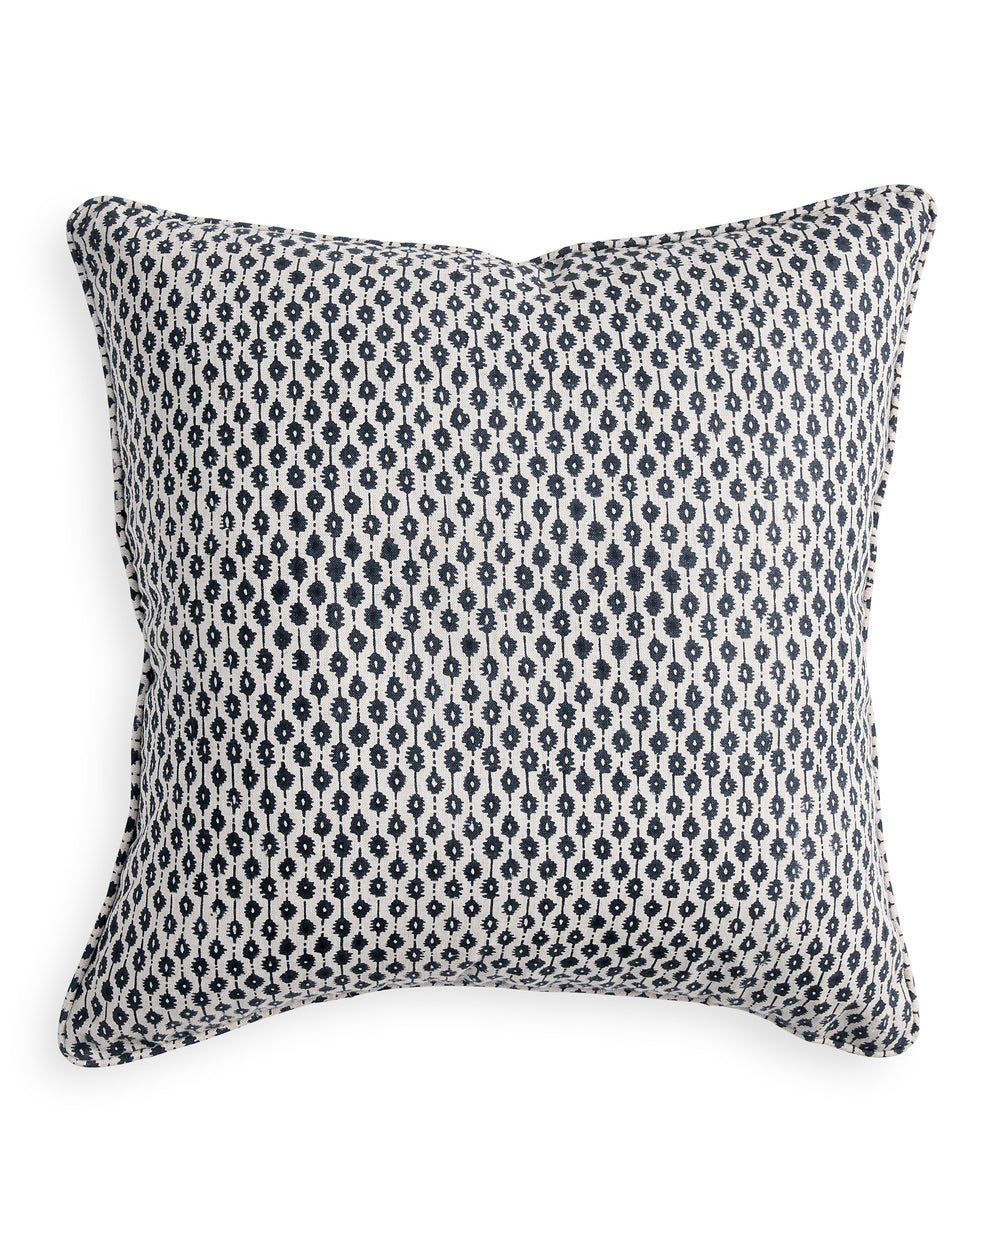 Siam Indian Teal Pillow